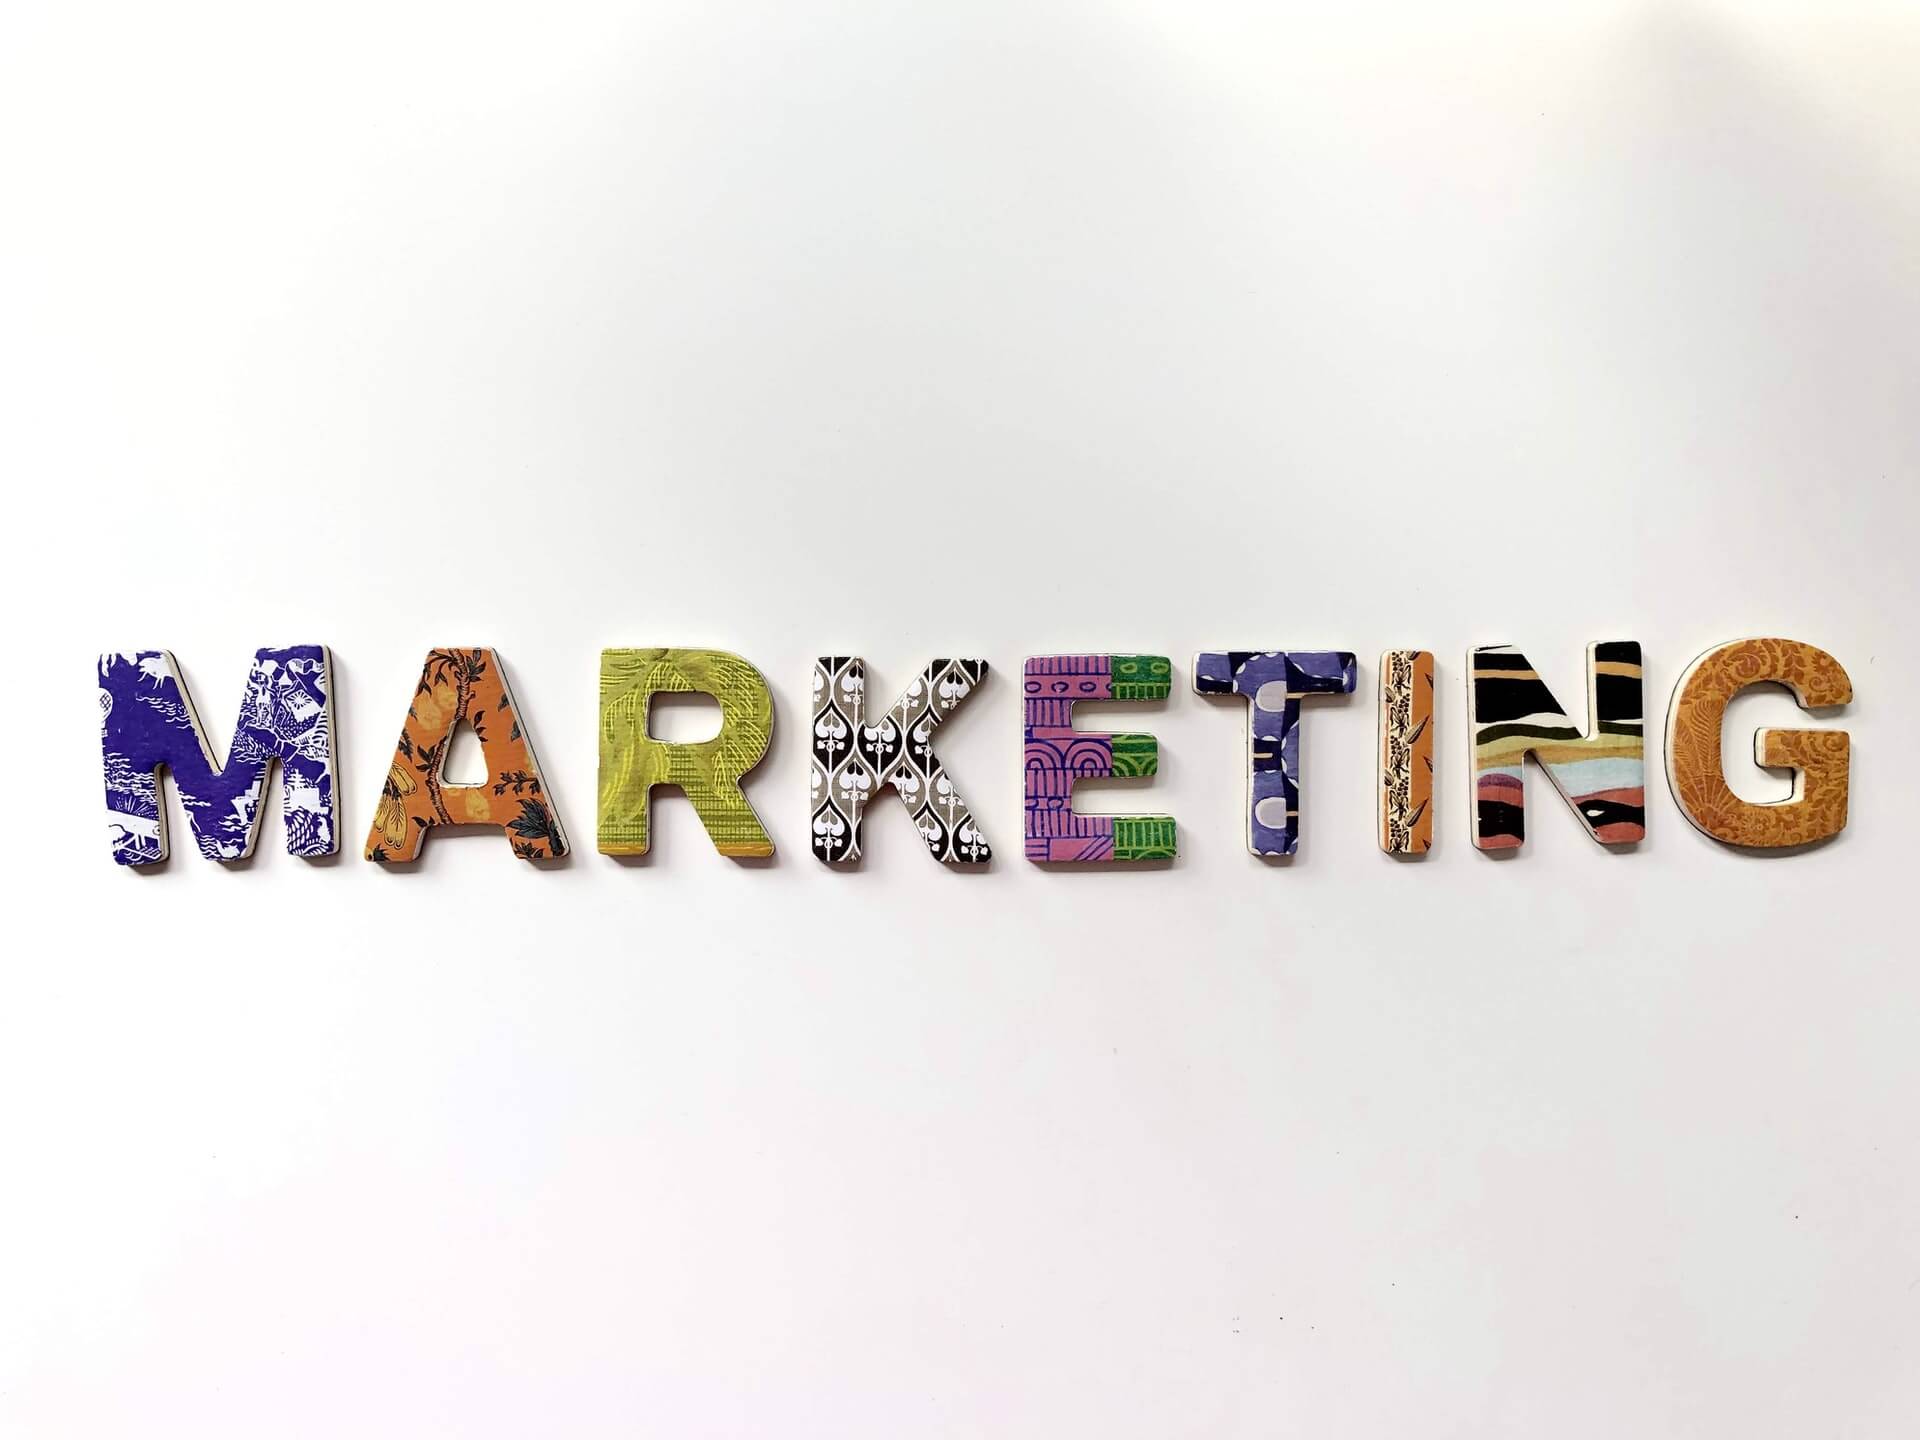 Marketing written in colored letters.